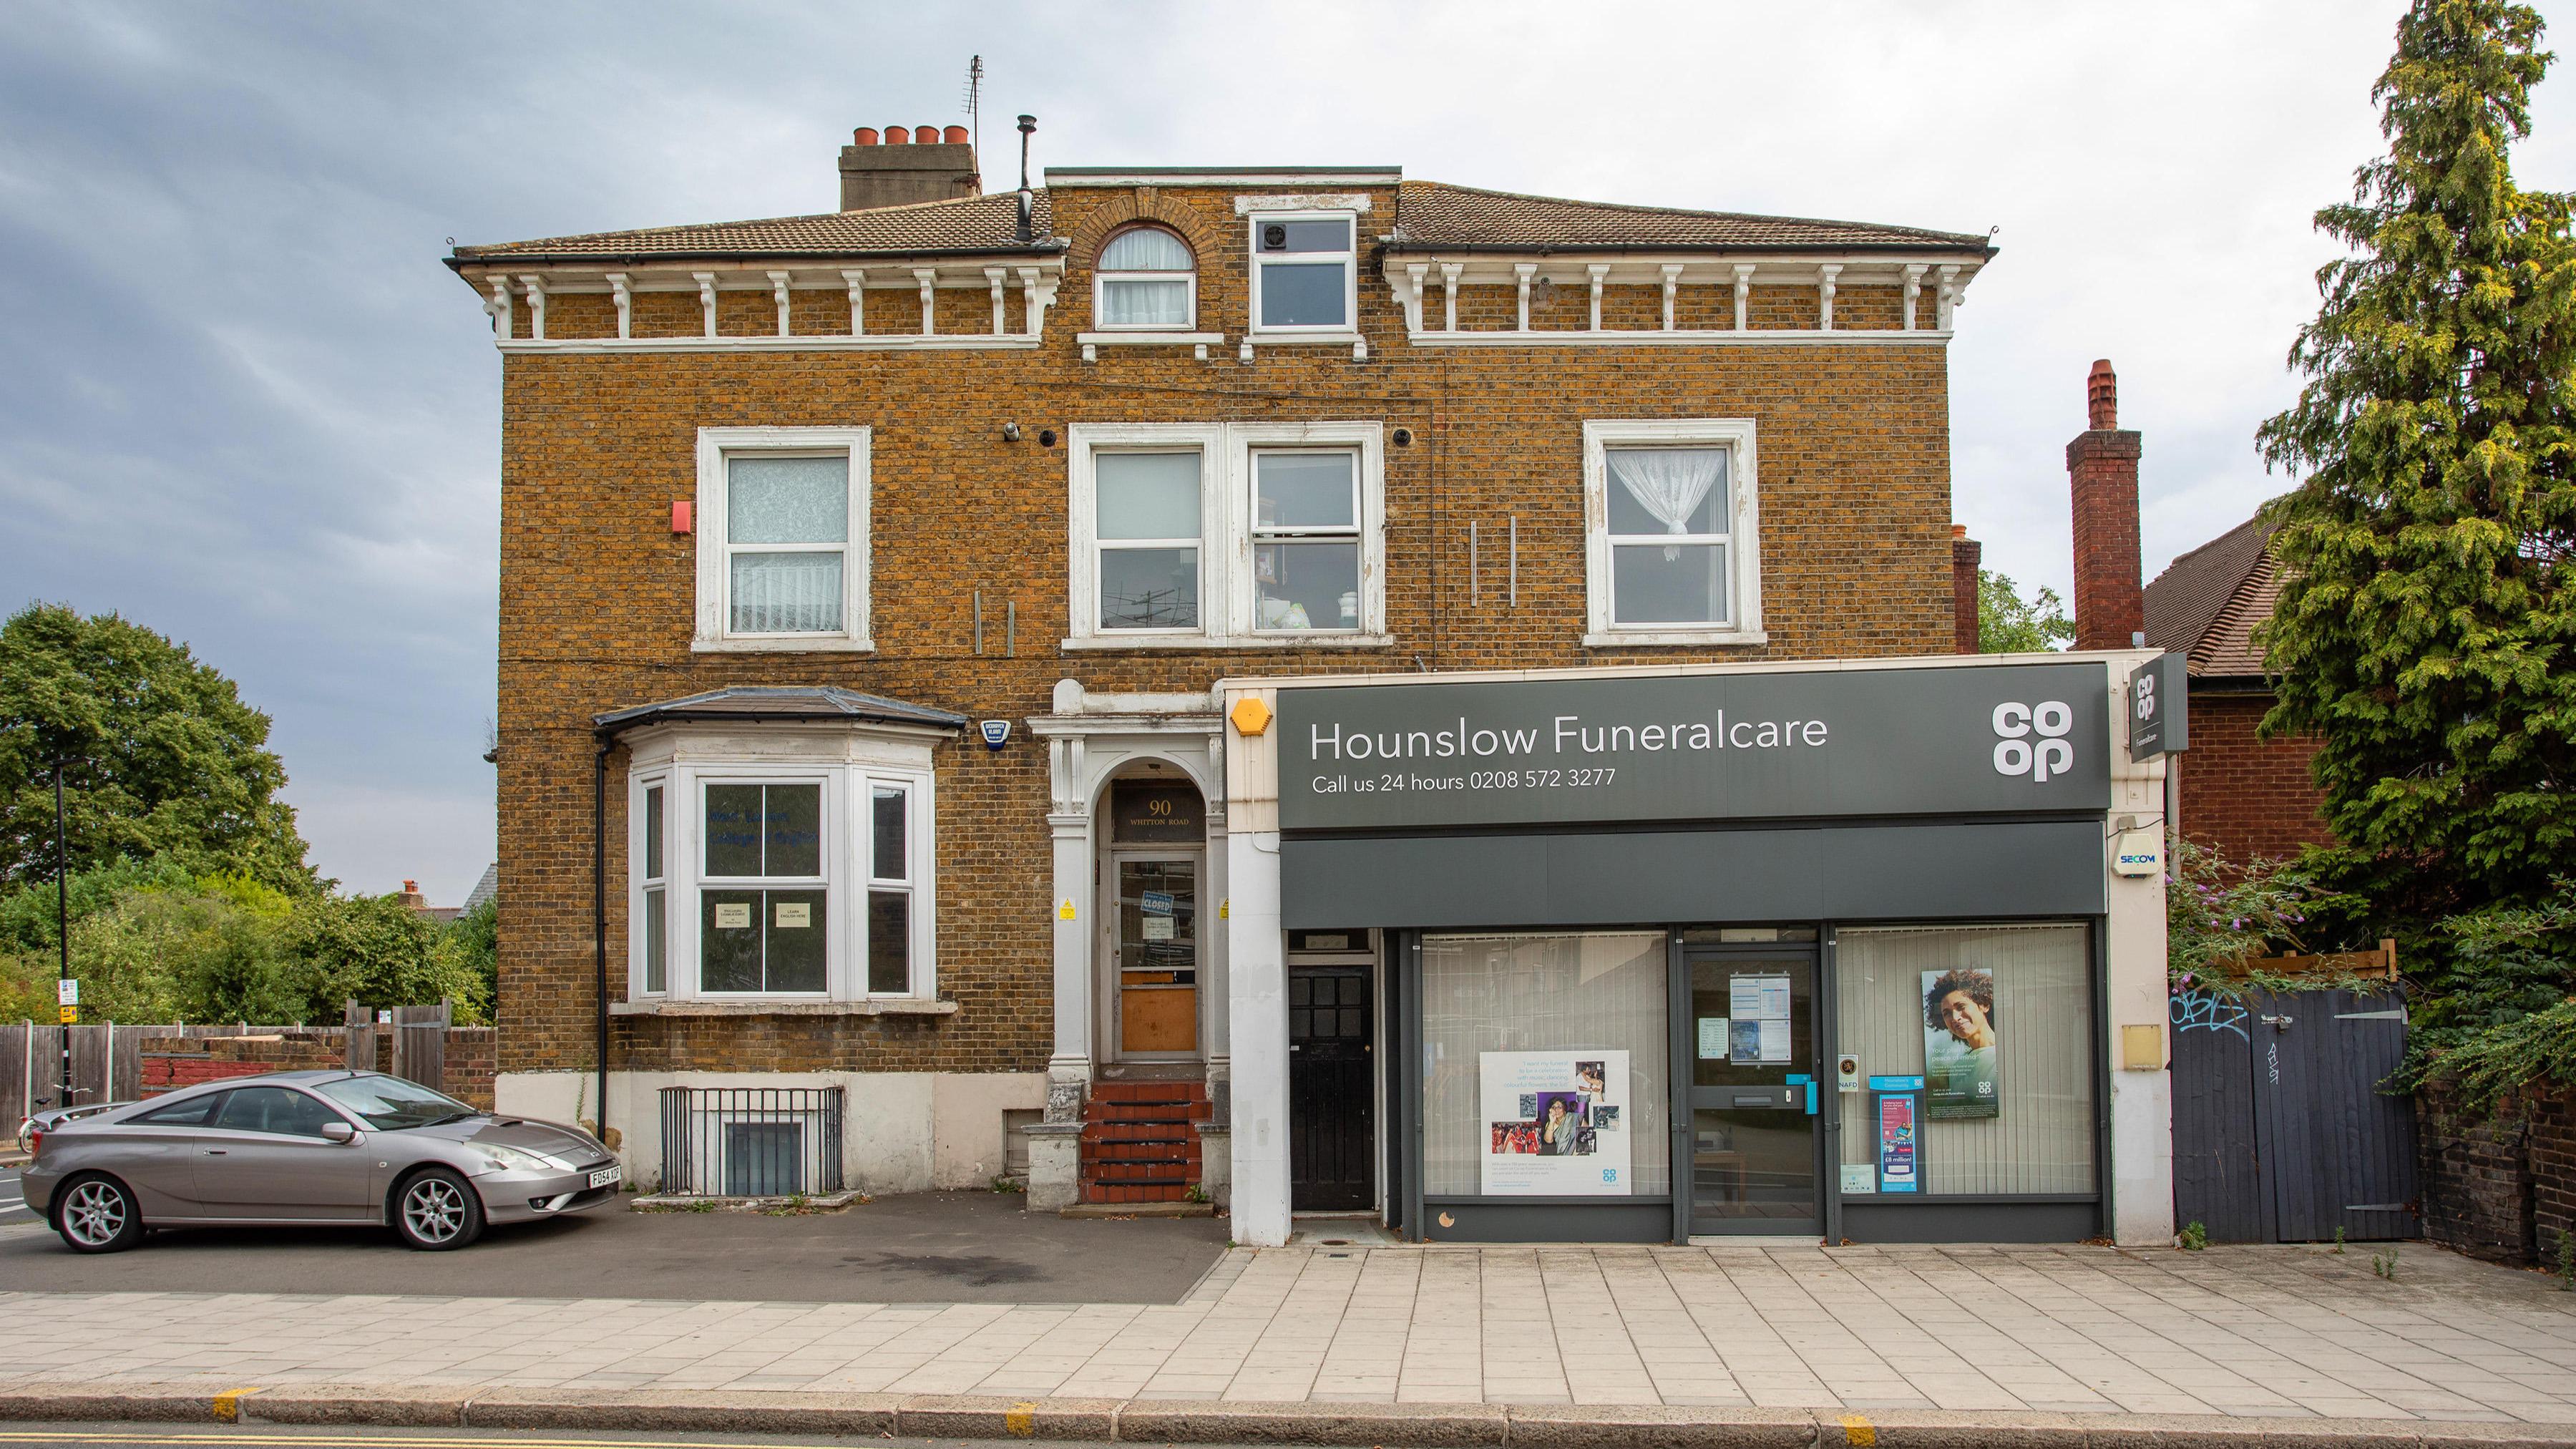 Images Co-op Funeralcare, Hounslow